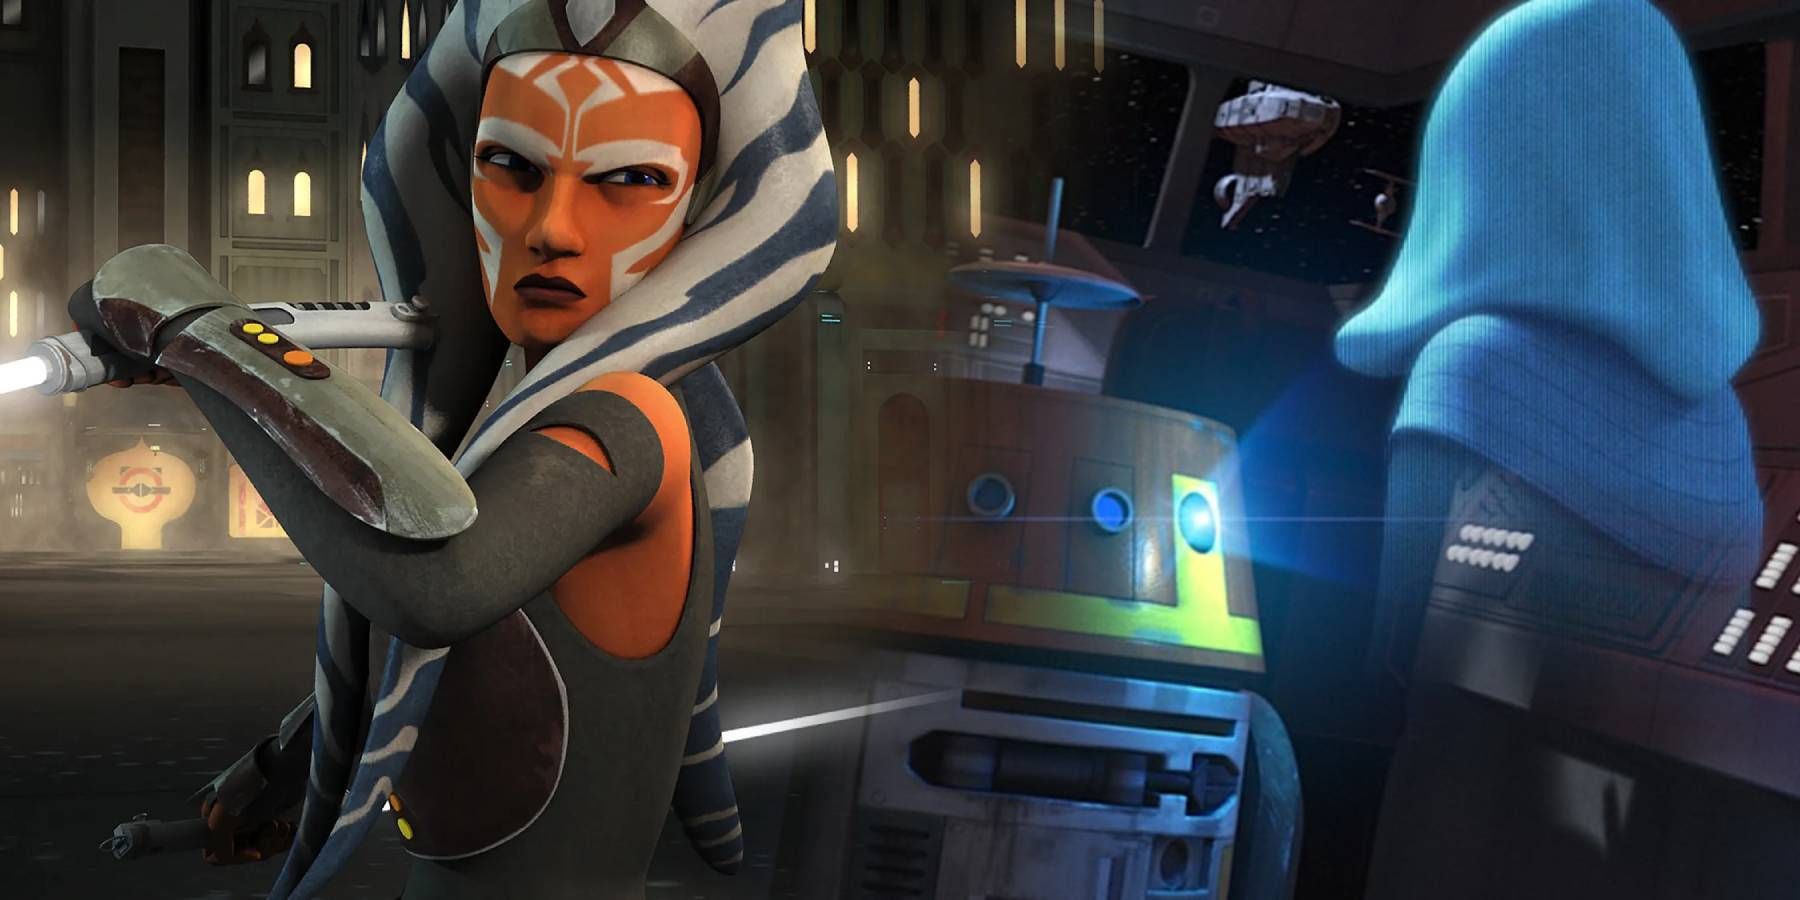 Ahsoka Tano on Star Wars Rebels and the droid Chopper C1-10P projecting a hologram of Fulcrum